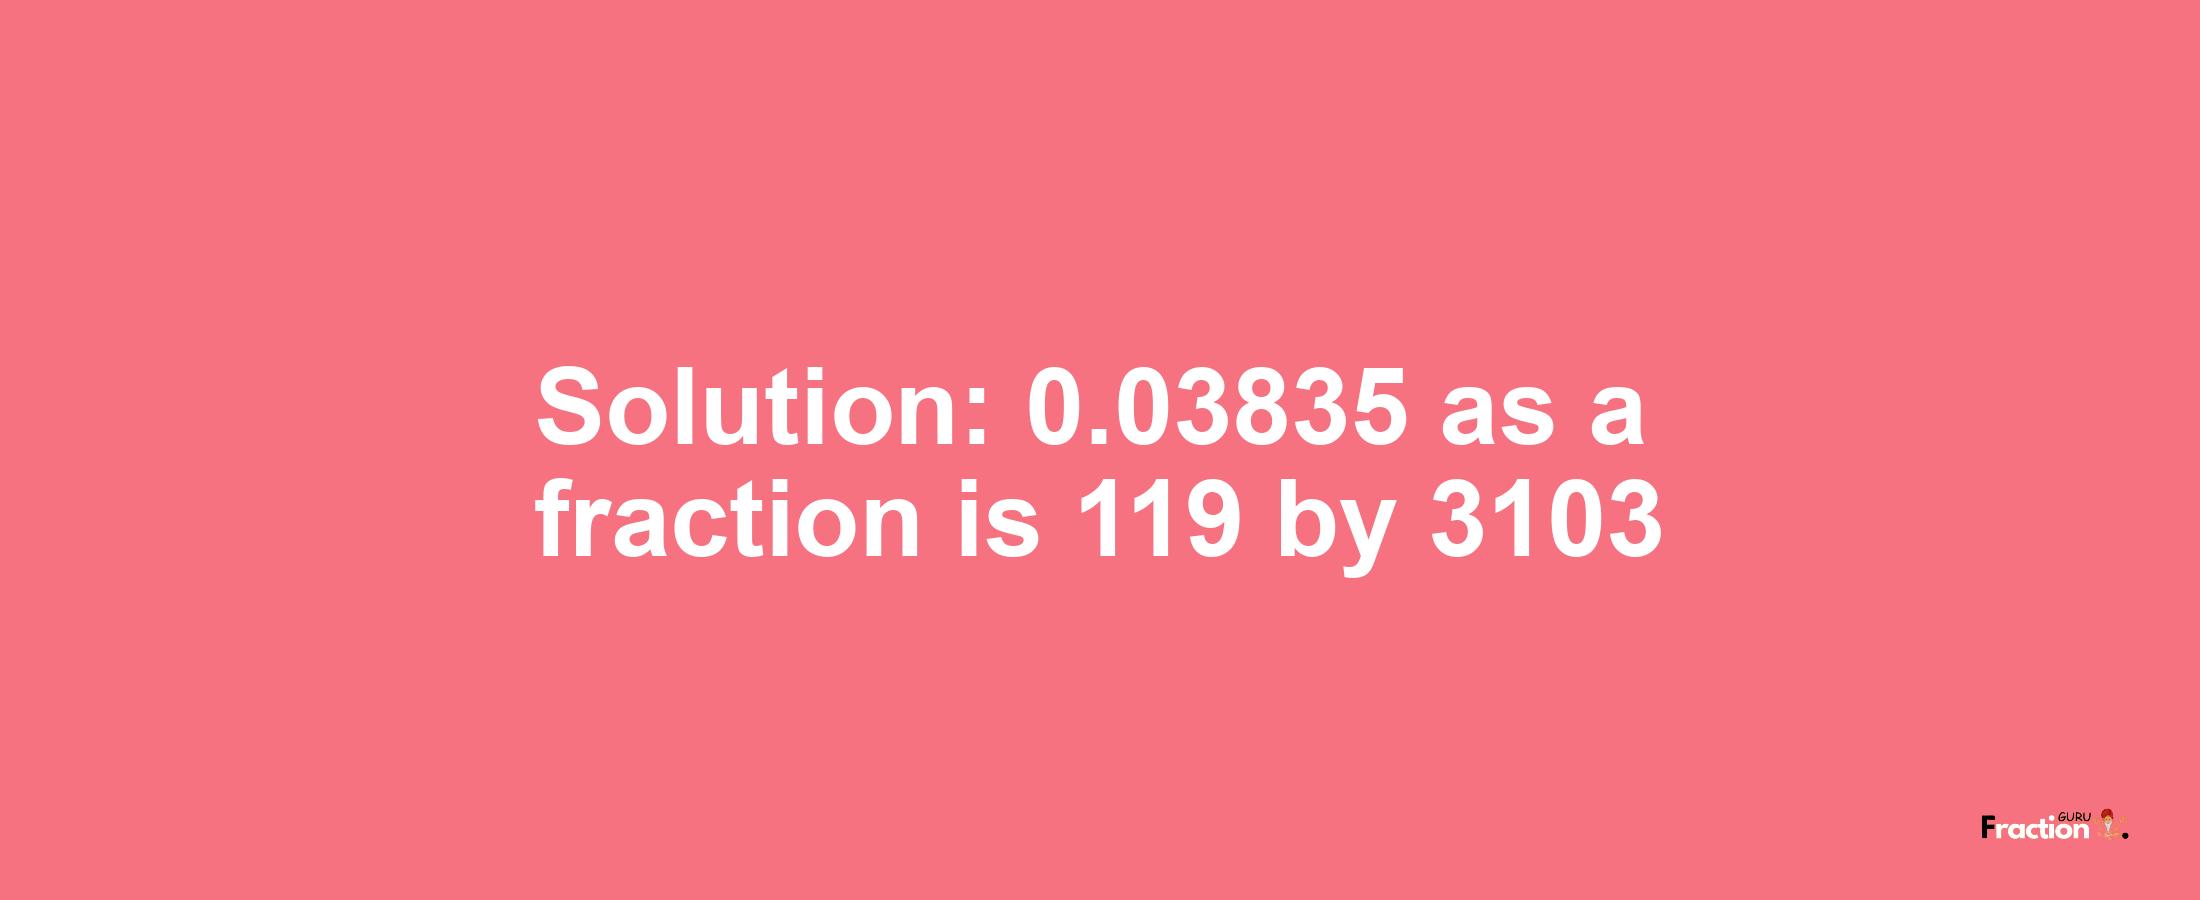 Solution:0.03835 as a fraction is 119/3103